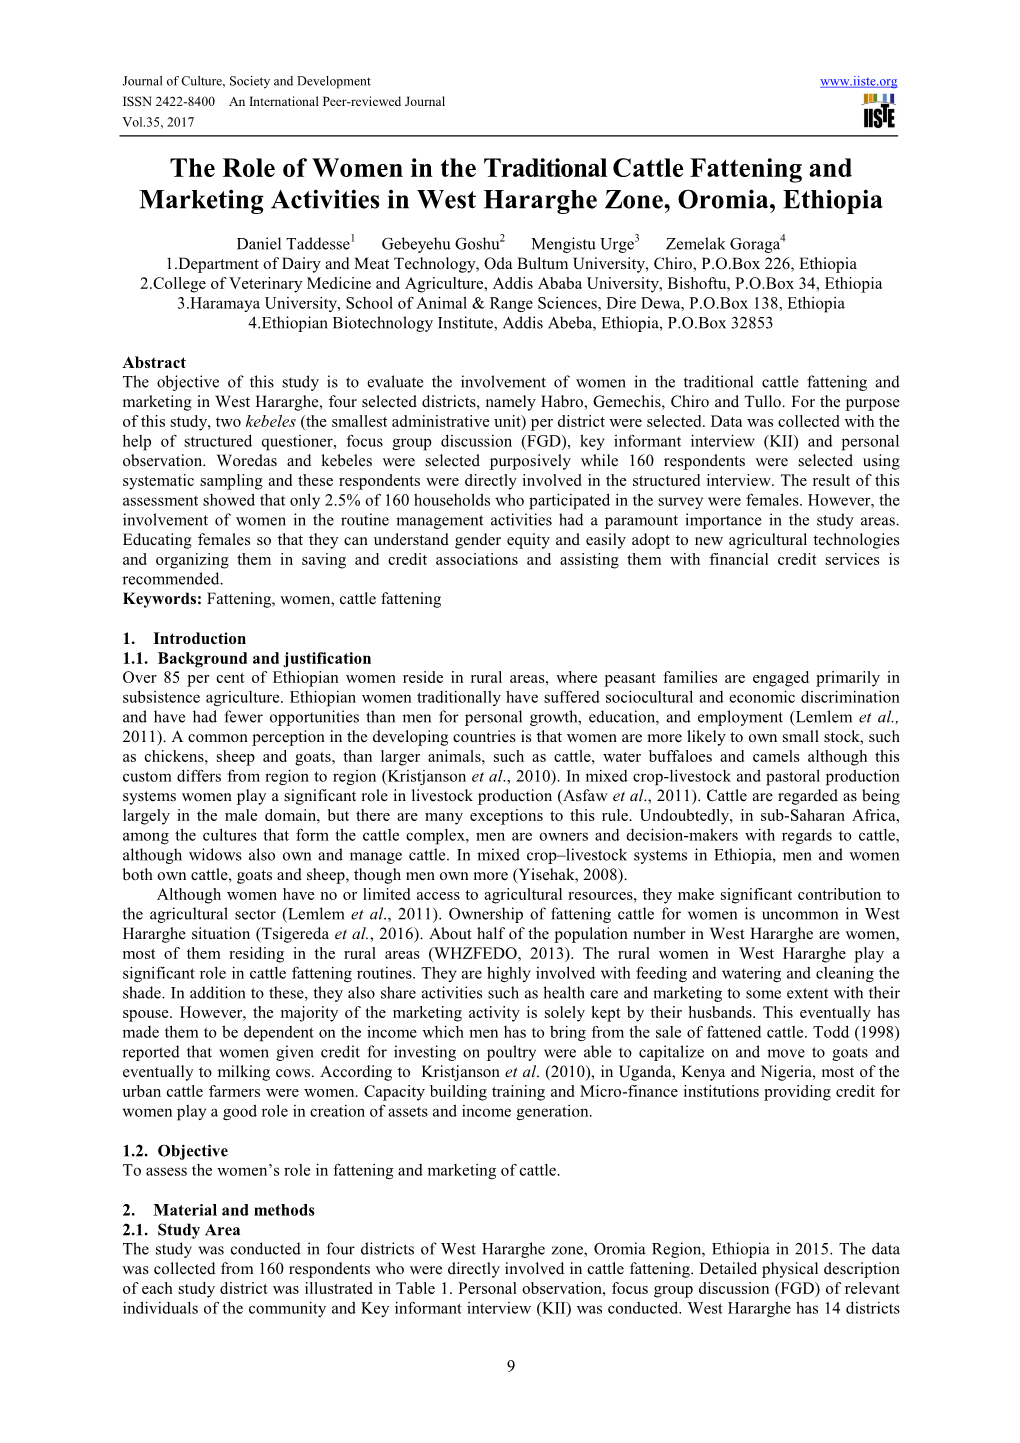 The Role of Women in the Traditional Cattle Fattening and Marketing Activities in West Hararghe Zone, Oromia, Ethiopia